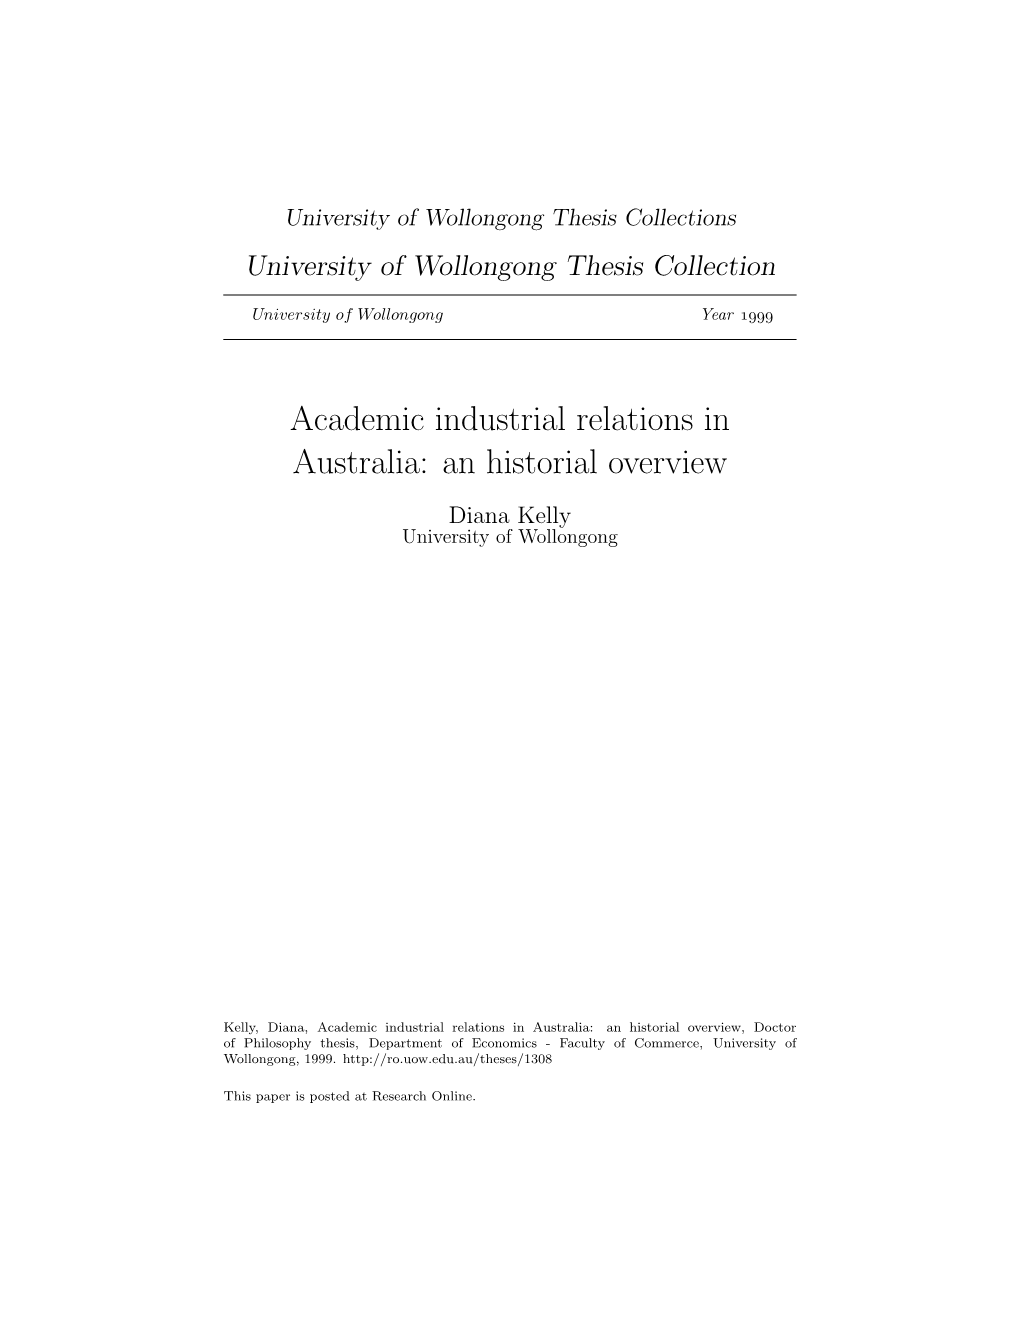 Academic Industrial Relations in Australia: an Historial Overview Diana Kelly University of Wollongong